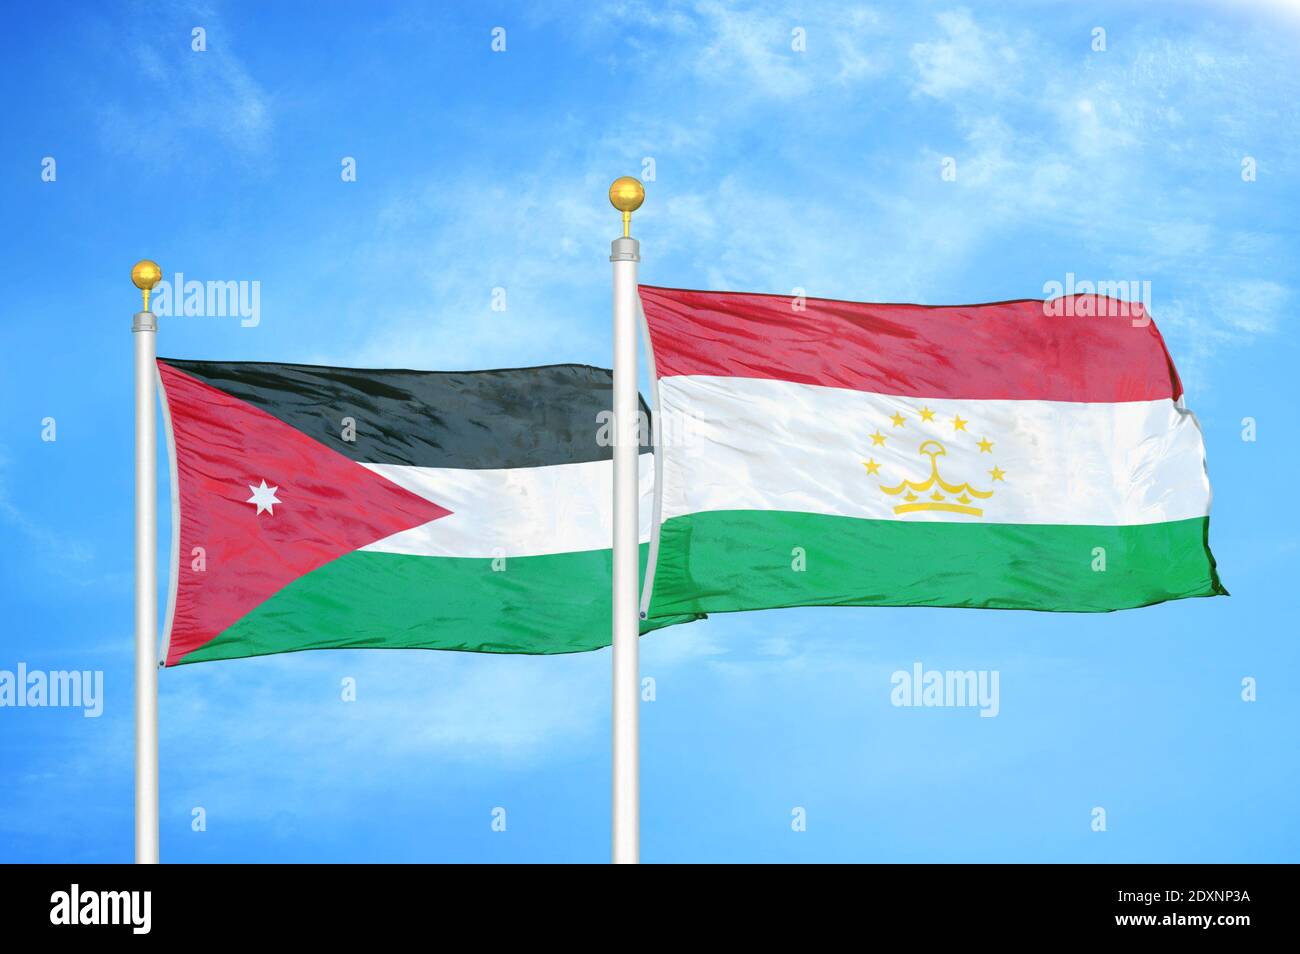 Jordan and Tajikistan two flags on flagpoles and blue cloudy sky Stock Photo